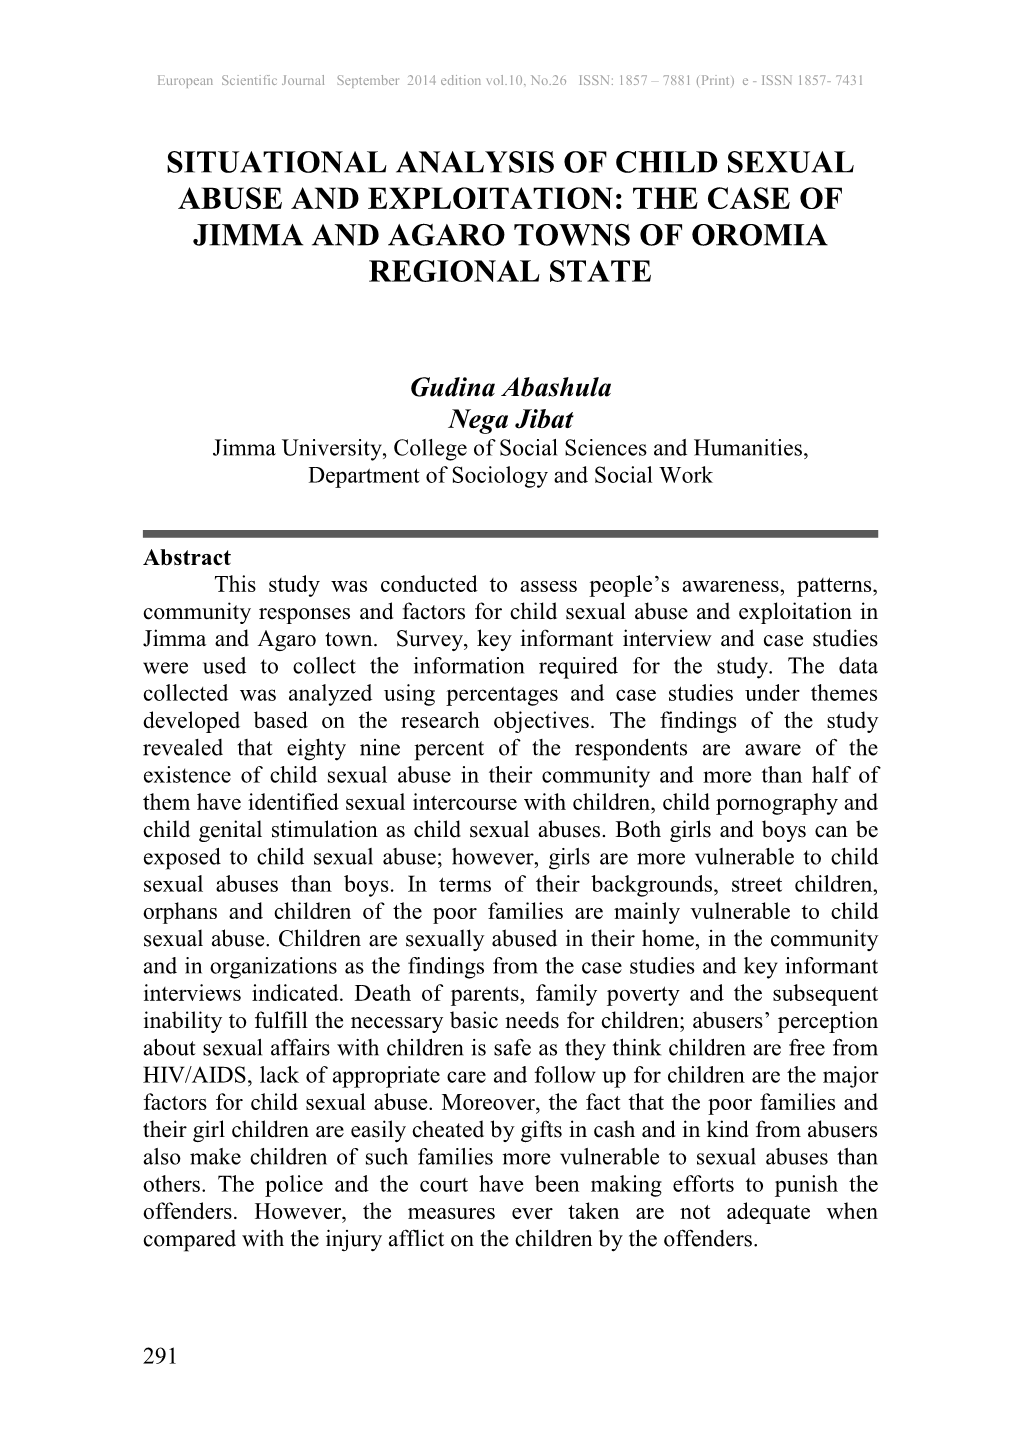 Situational Analysis of Child Sexual Abuse and Exploitation: the Case of Jimma and Agaro Towns of Oromia Regional State